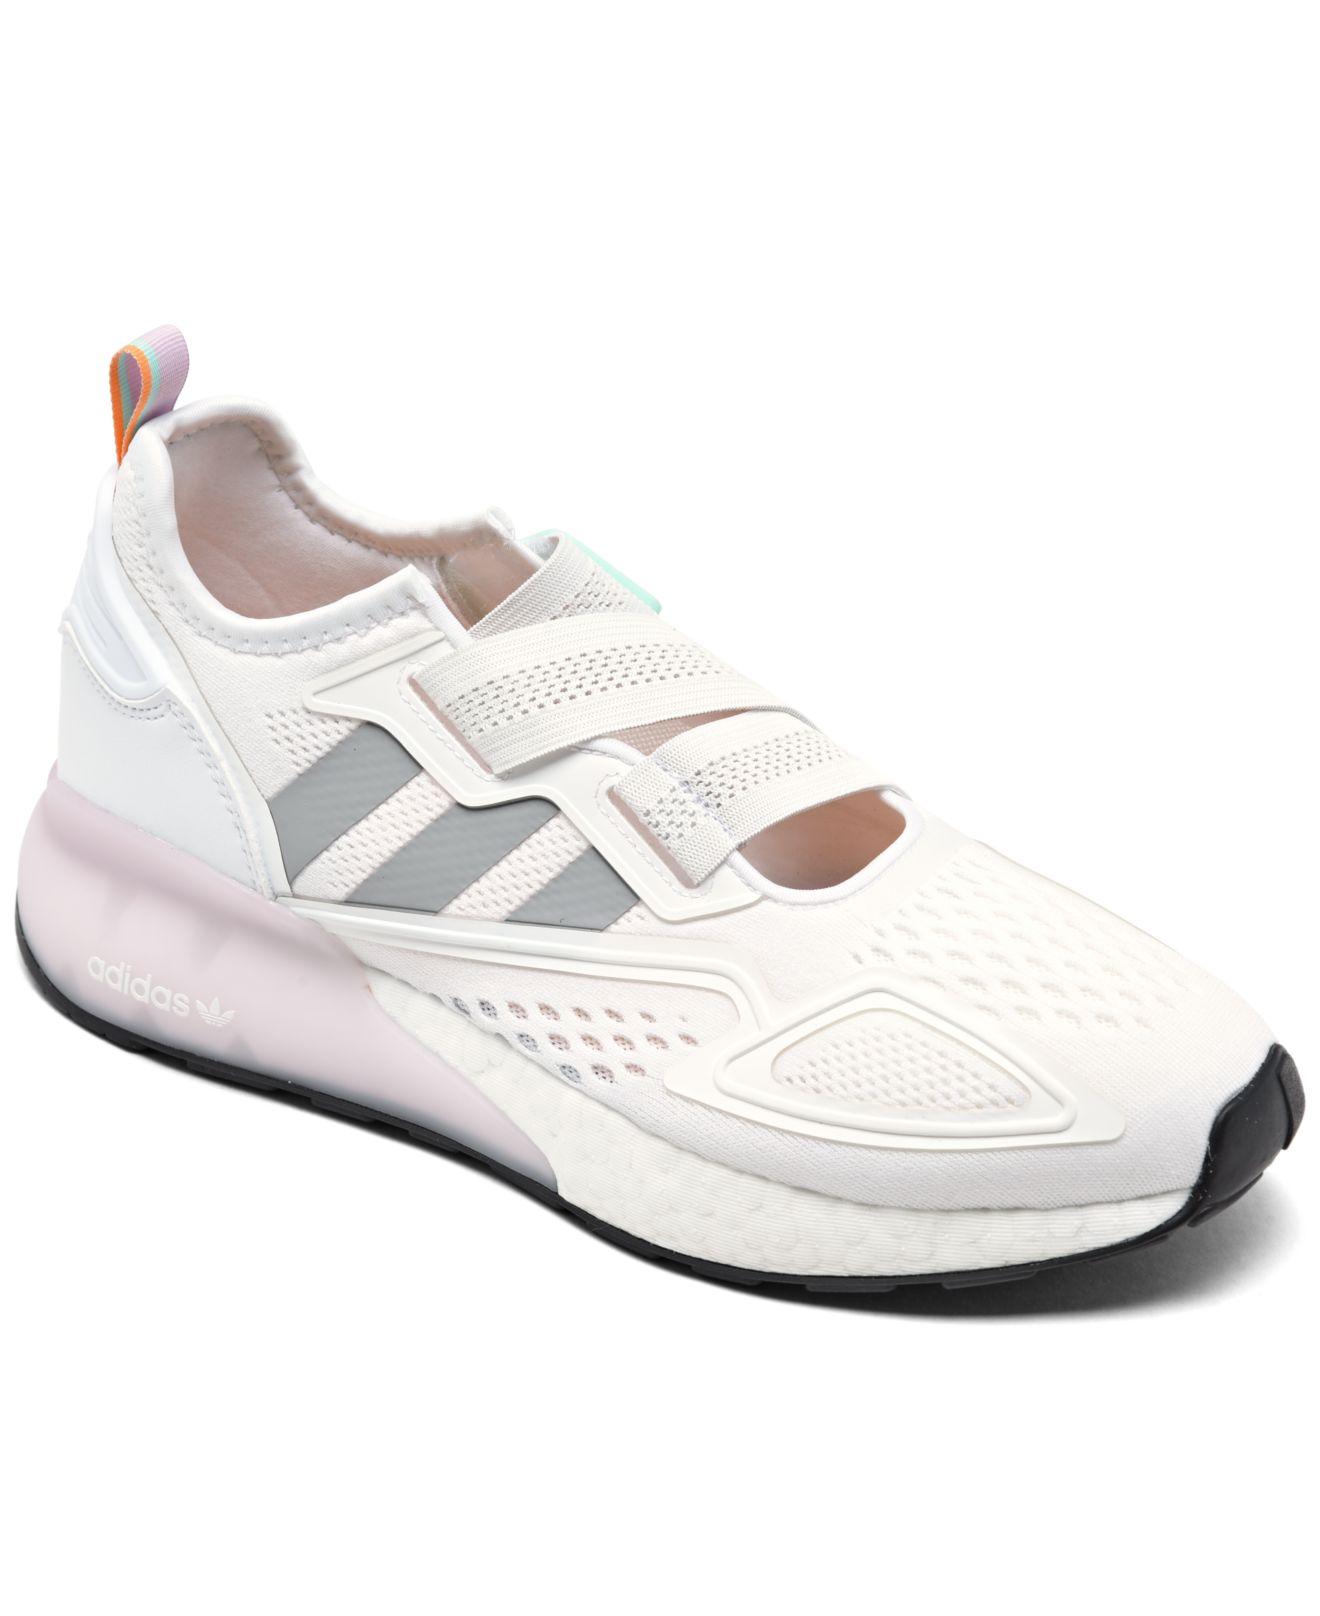 adidas Rubber Zx 2k Boost Running Sneakers From Finish Line in 